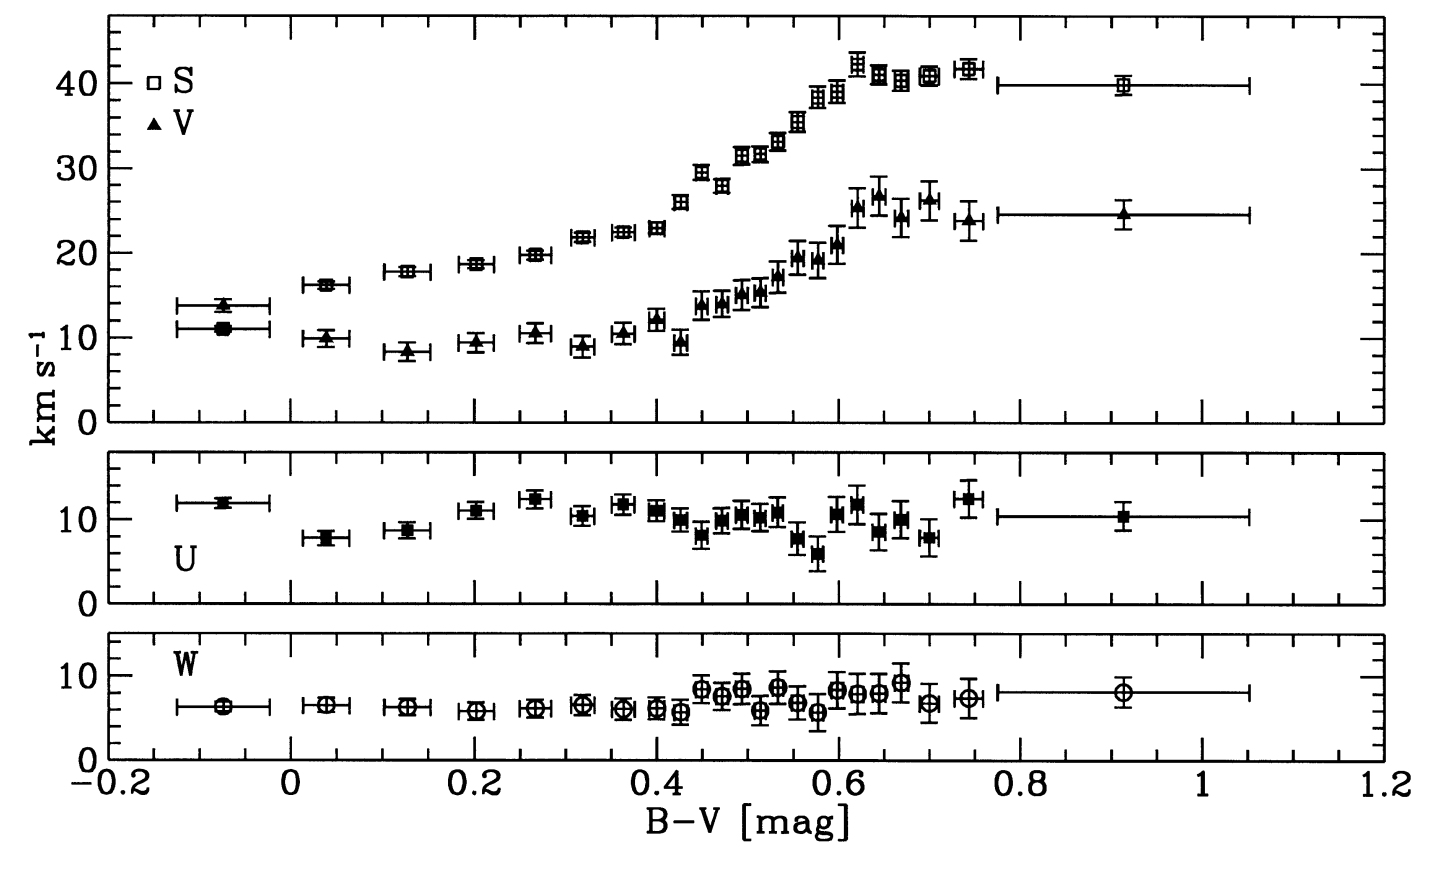 Figure 3 from Dehnen & Binney (1998): mean velocities as a function of B-V for main-sequence stars near the Sun